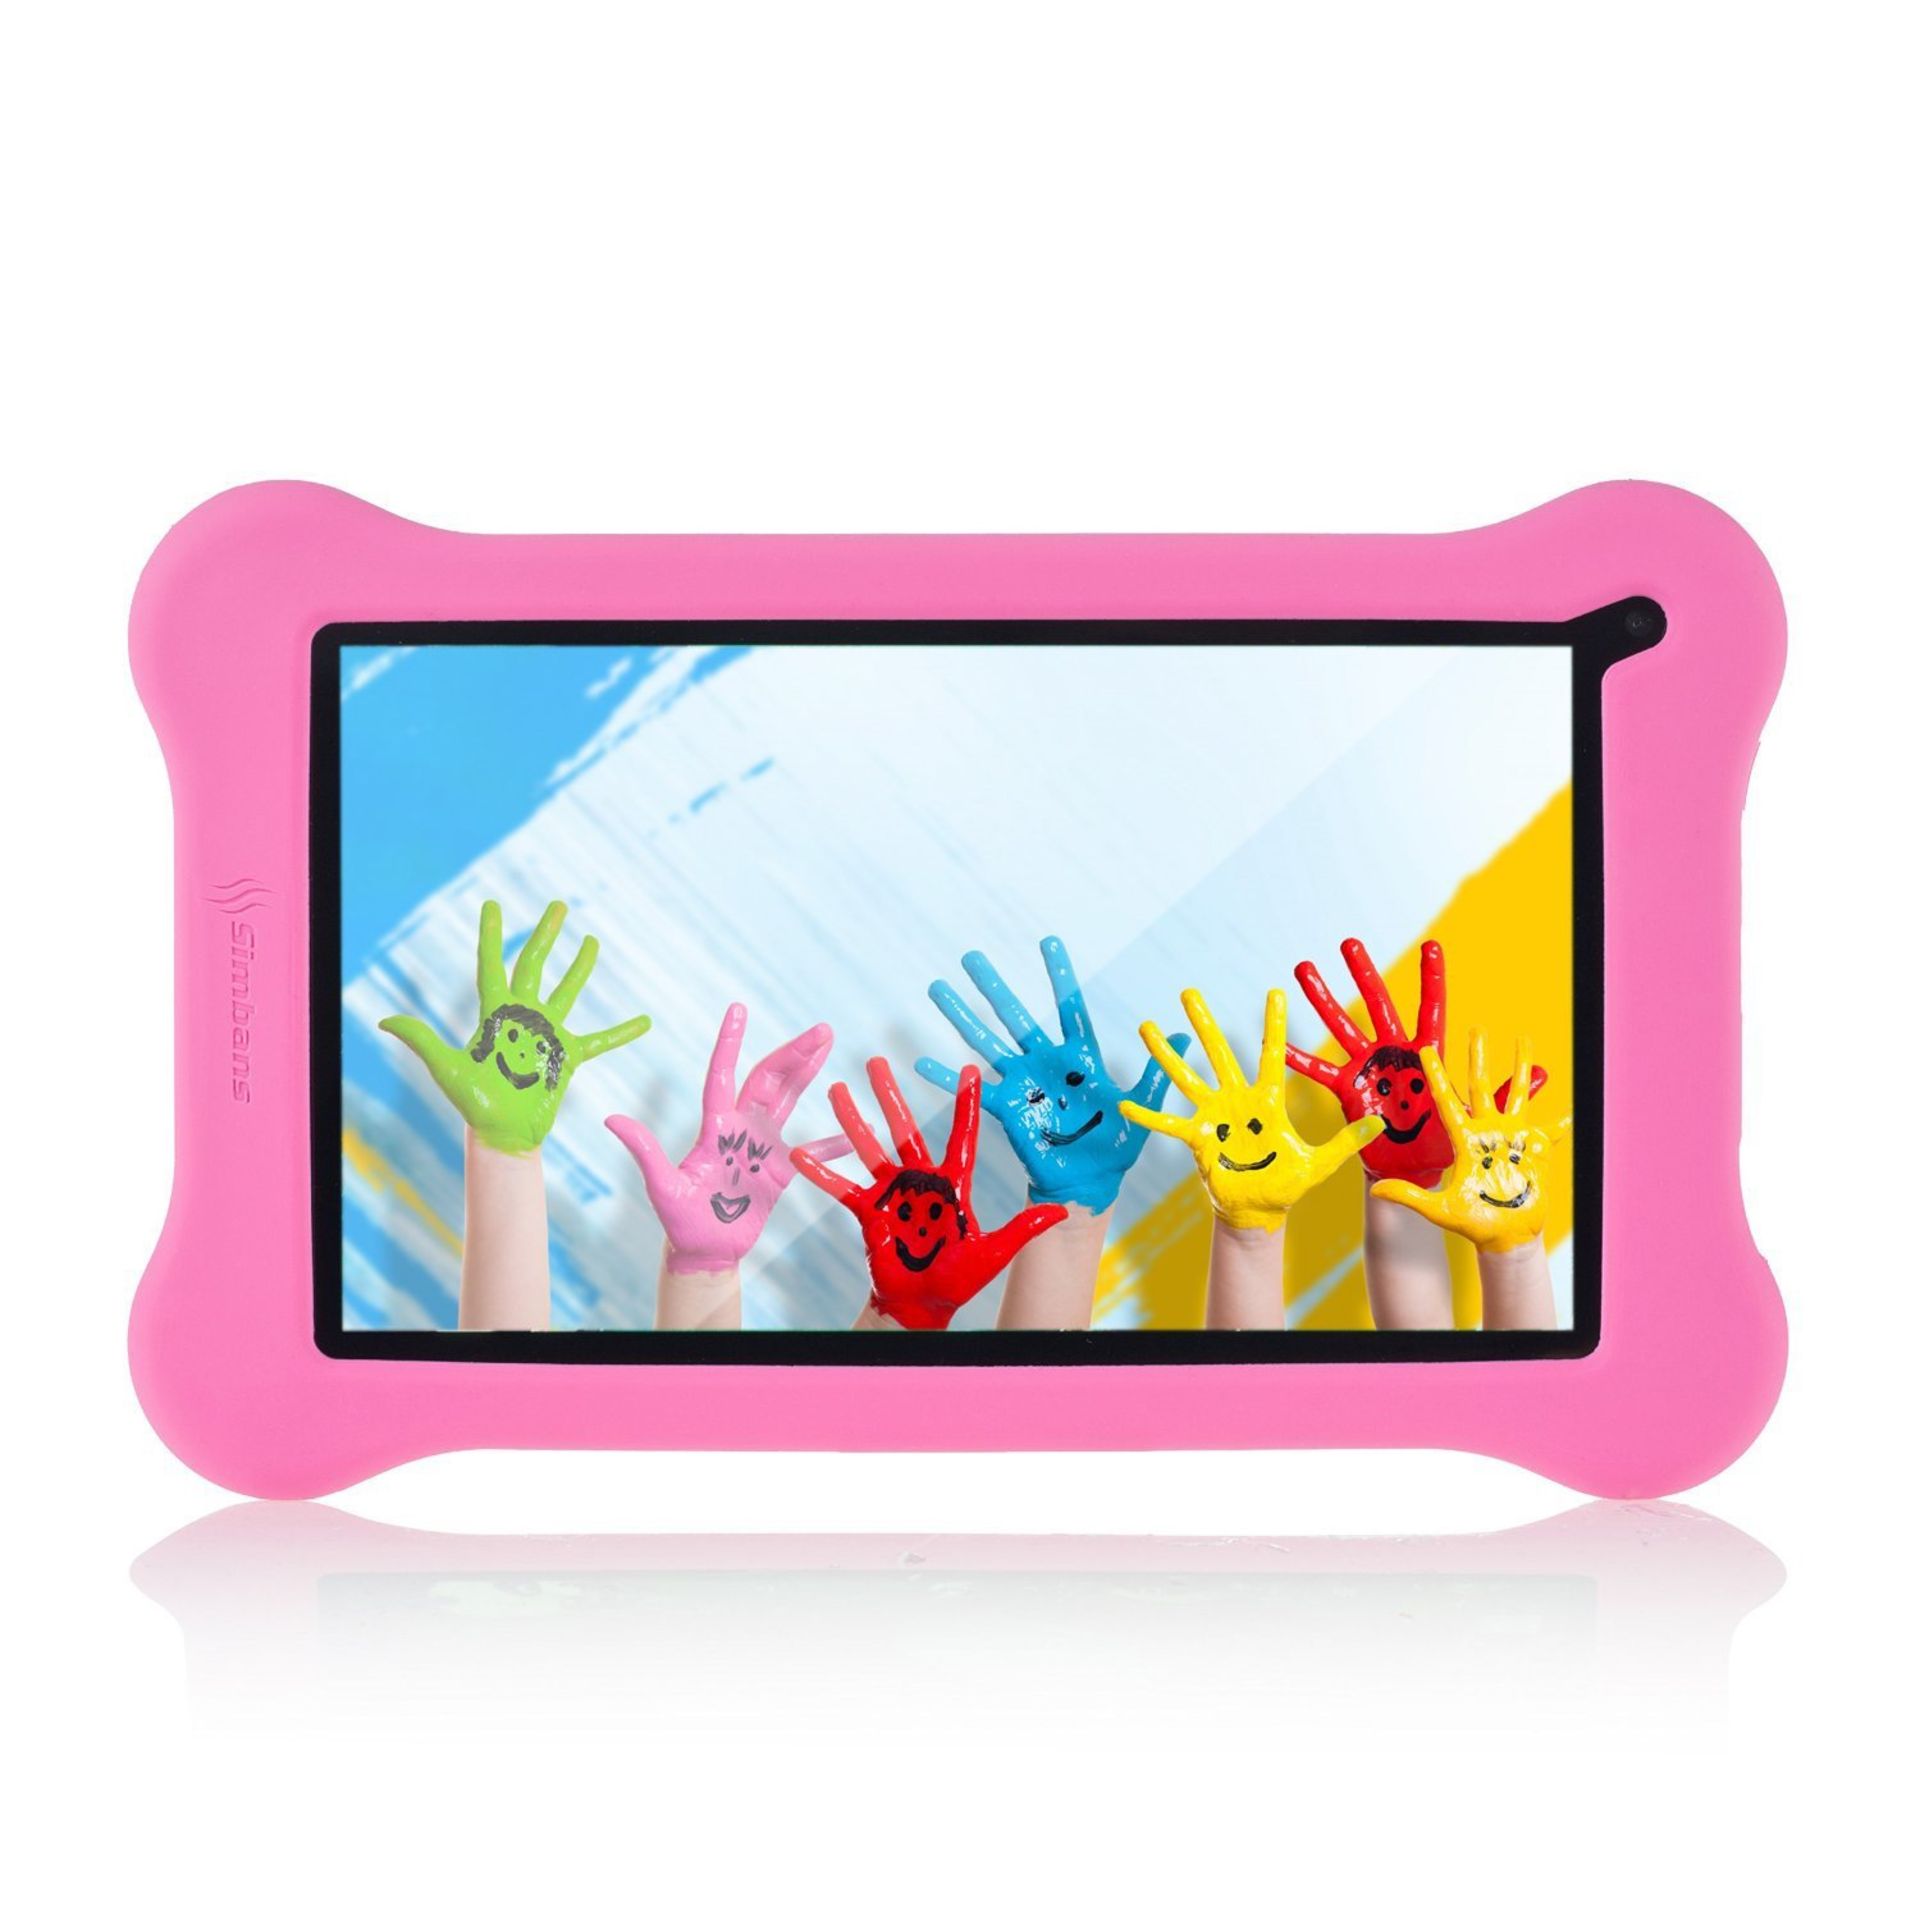 V *TRADE QTY* Grade A Funlet Pink 7 inch Tablet with Protective Case and Tablet Sleeve - IPS